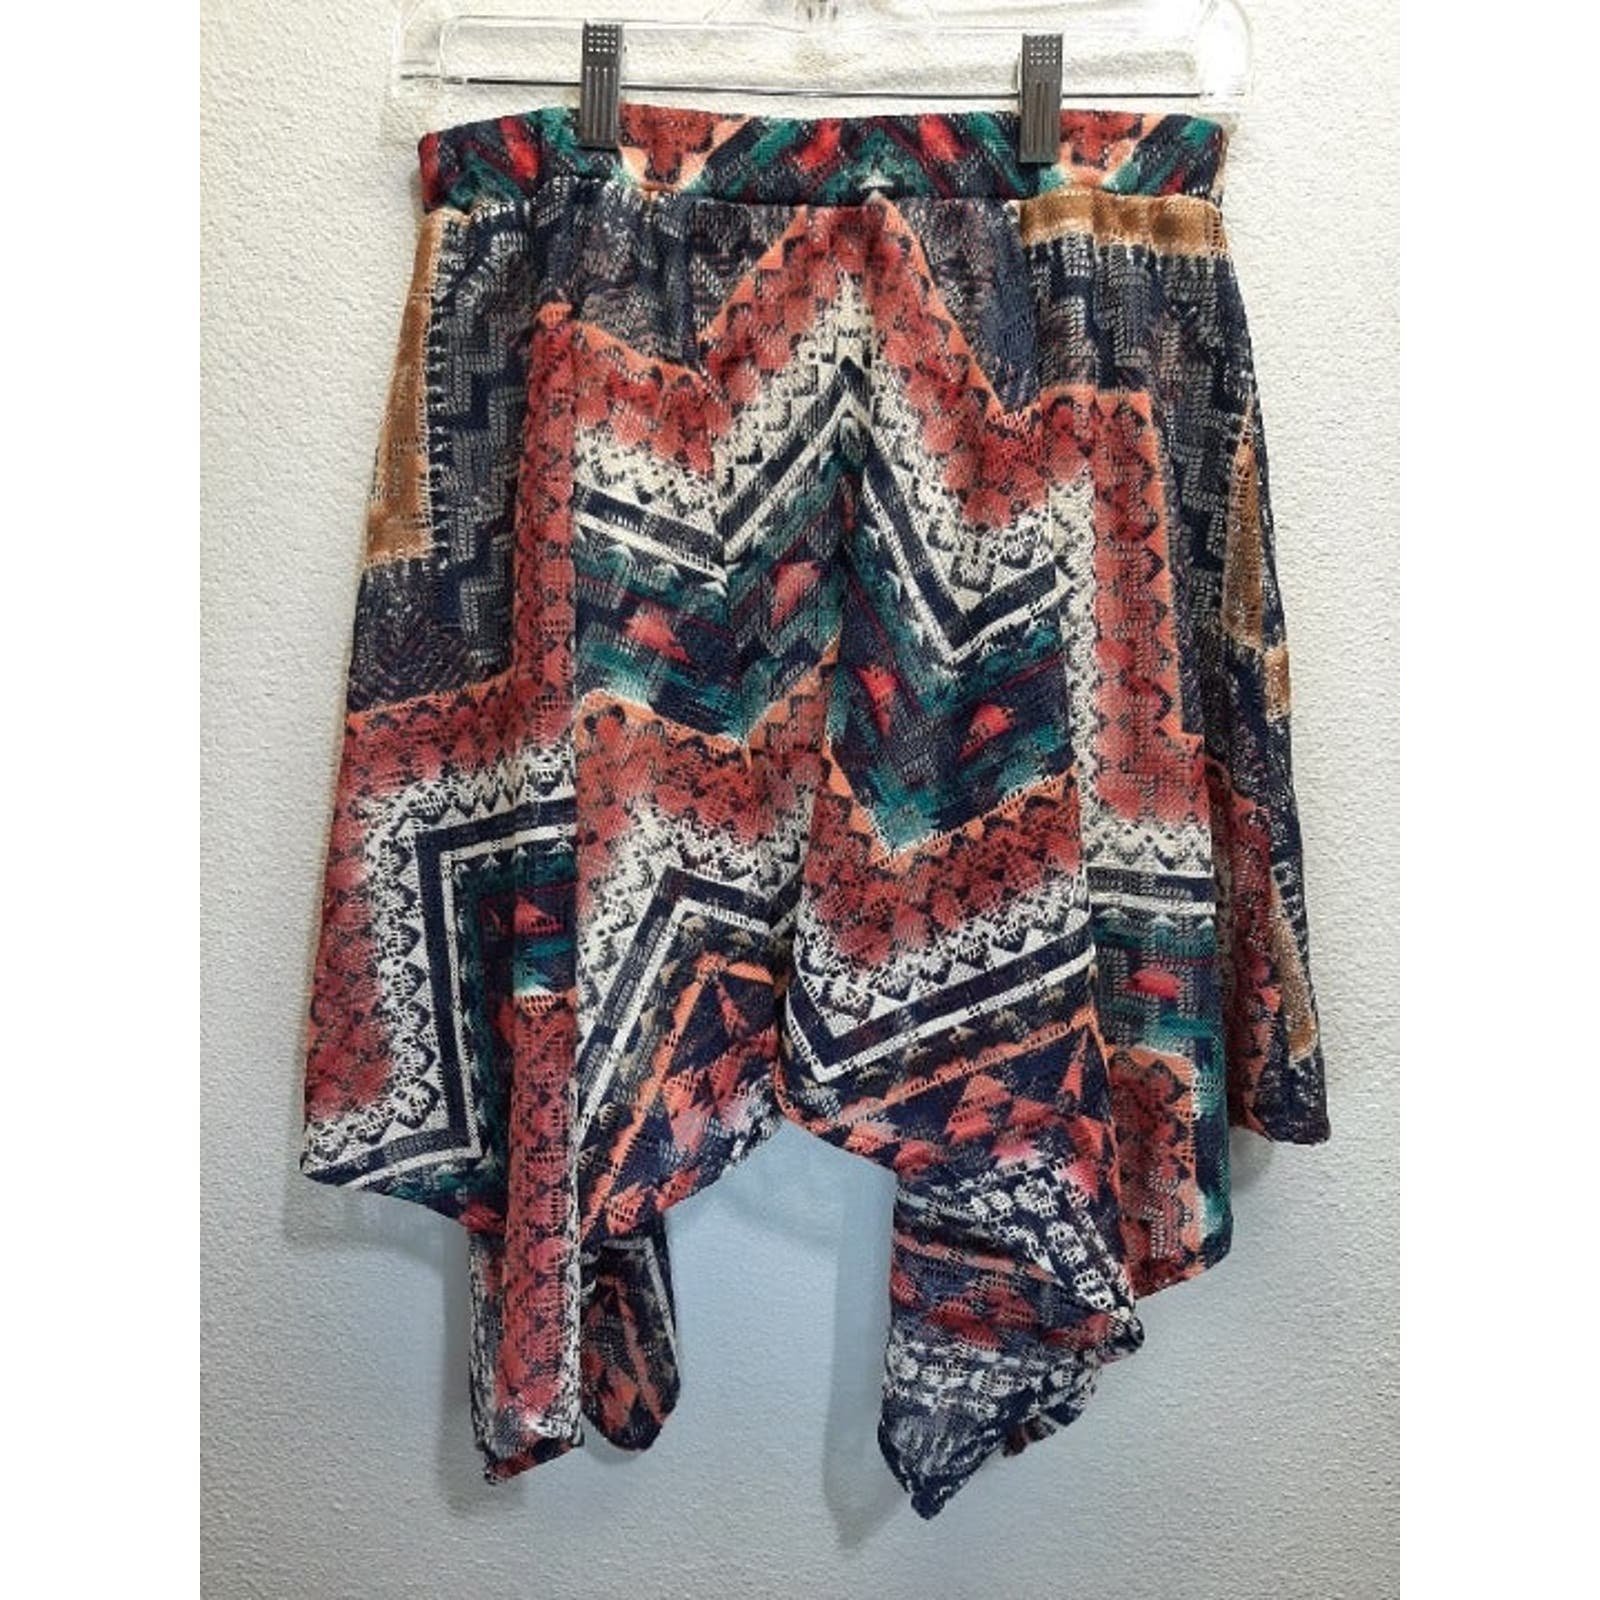 Authentic Vanity Geometerical Design Pull-on Skirt l Si